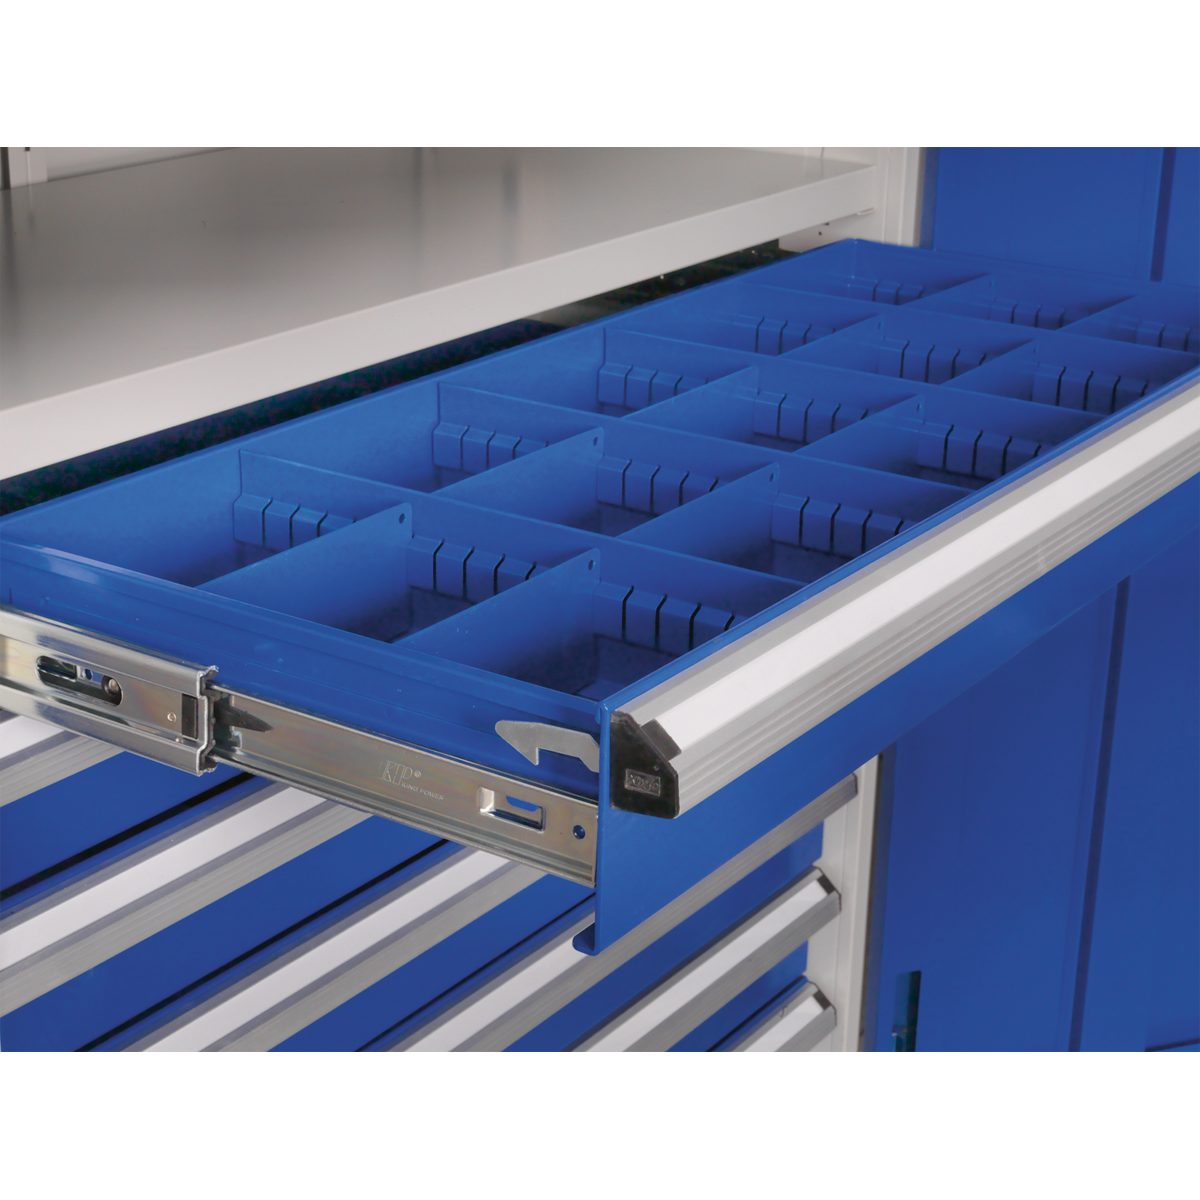 Heavy-duty ball bearing drawer slides with a load bearing of up to 75kg.